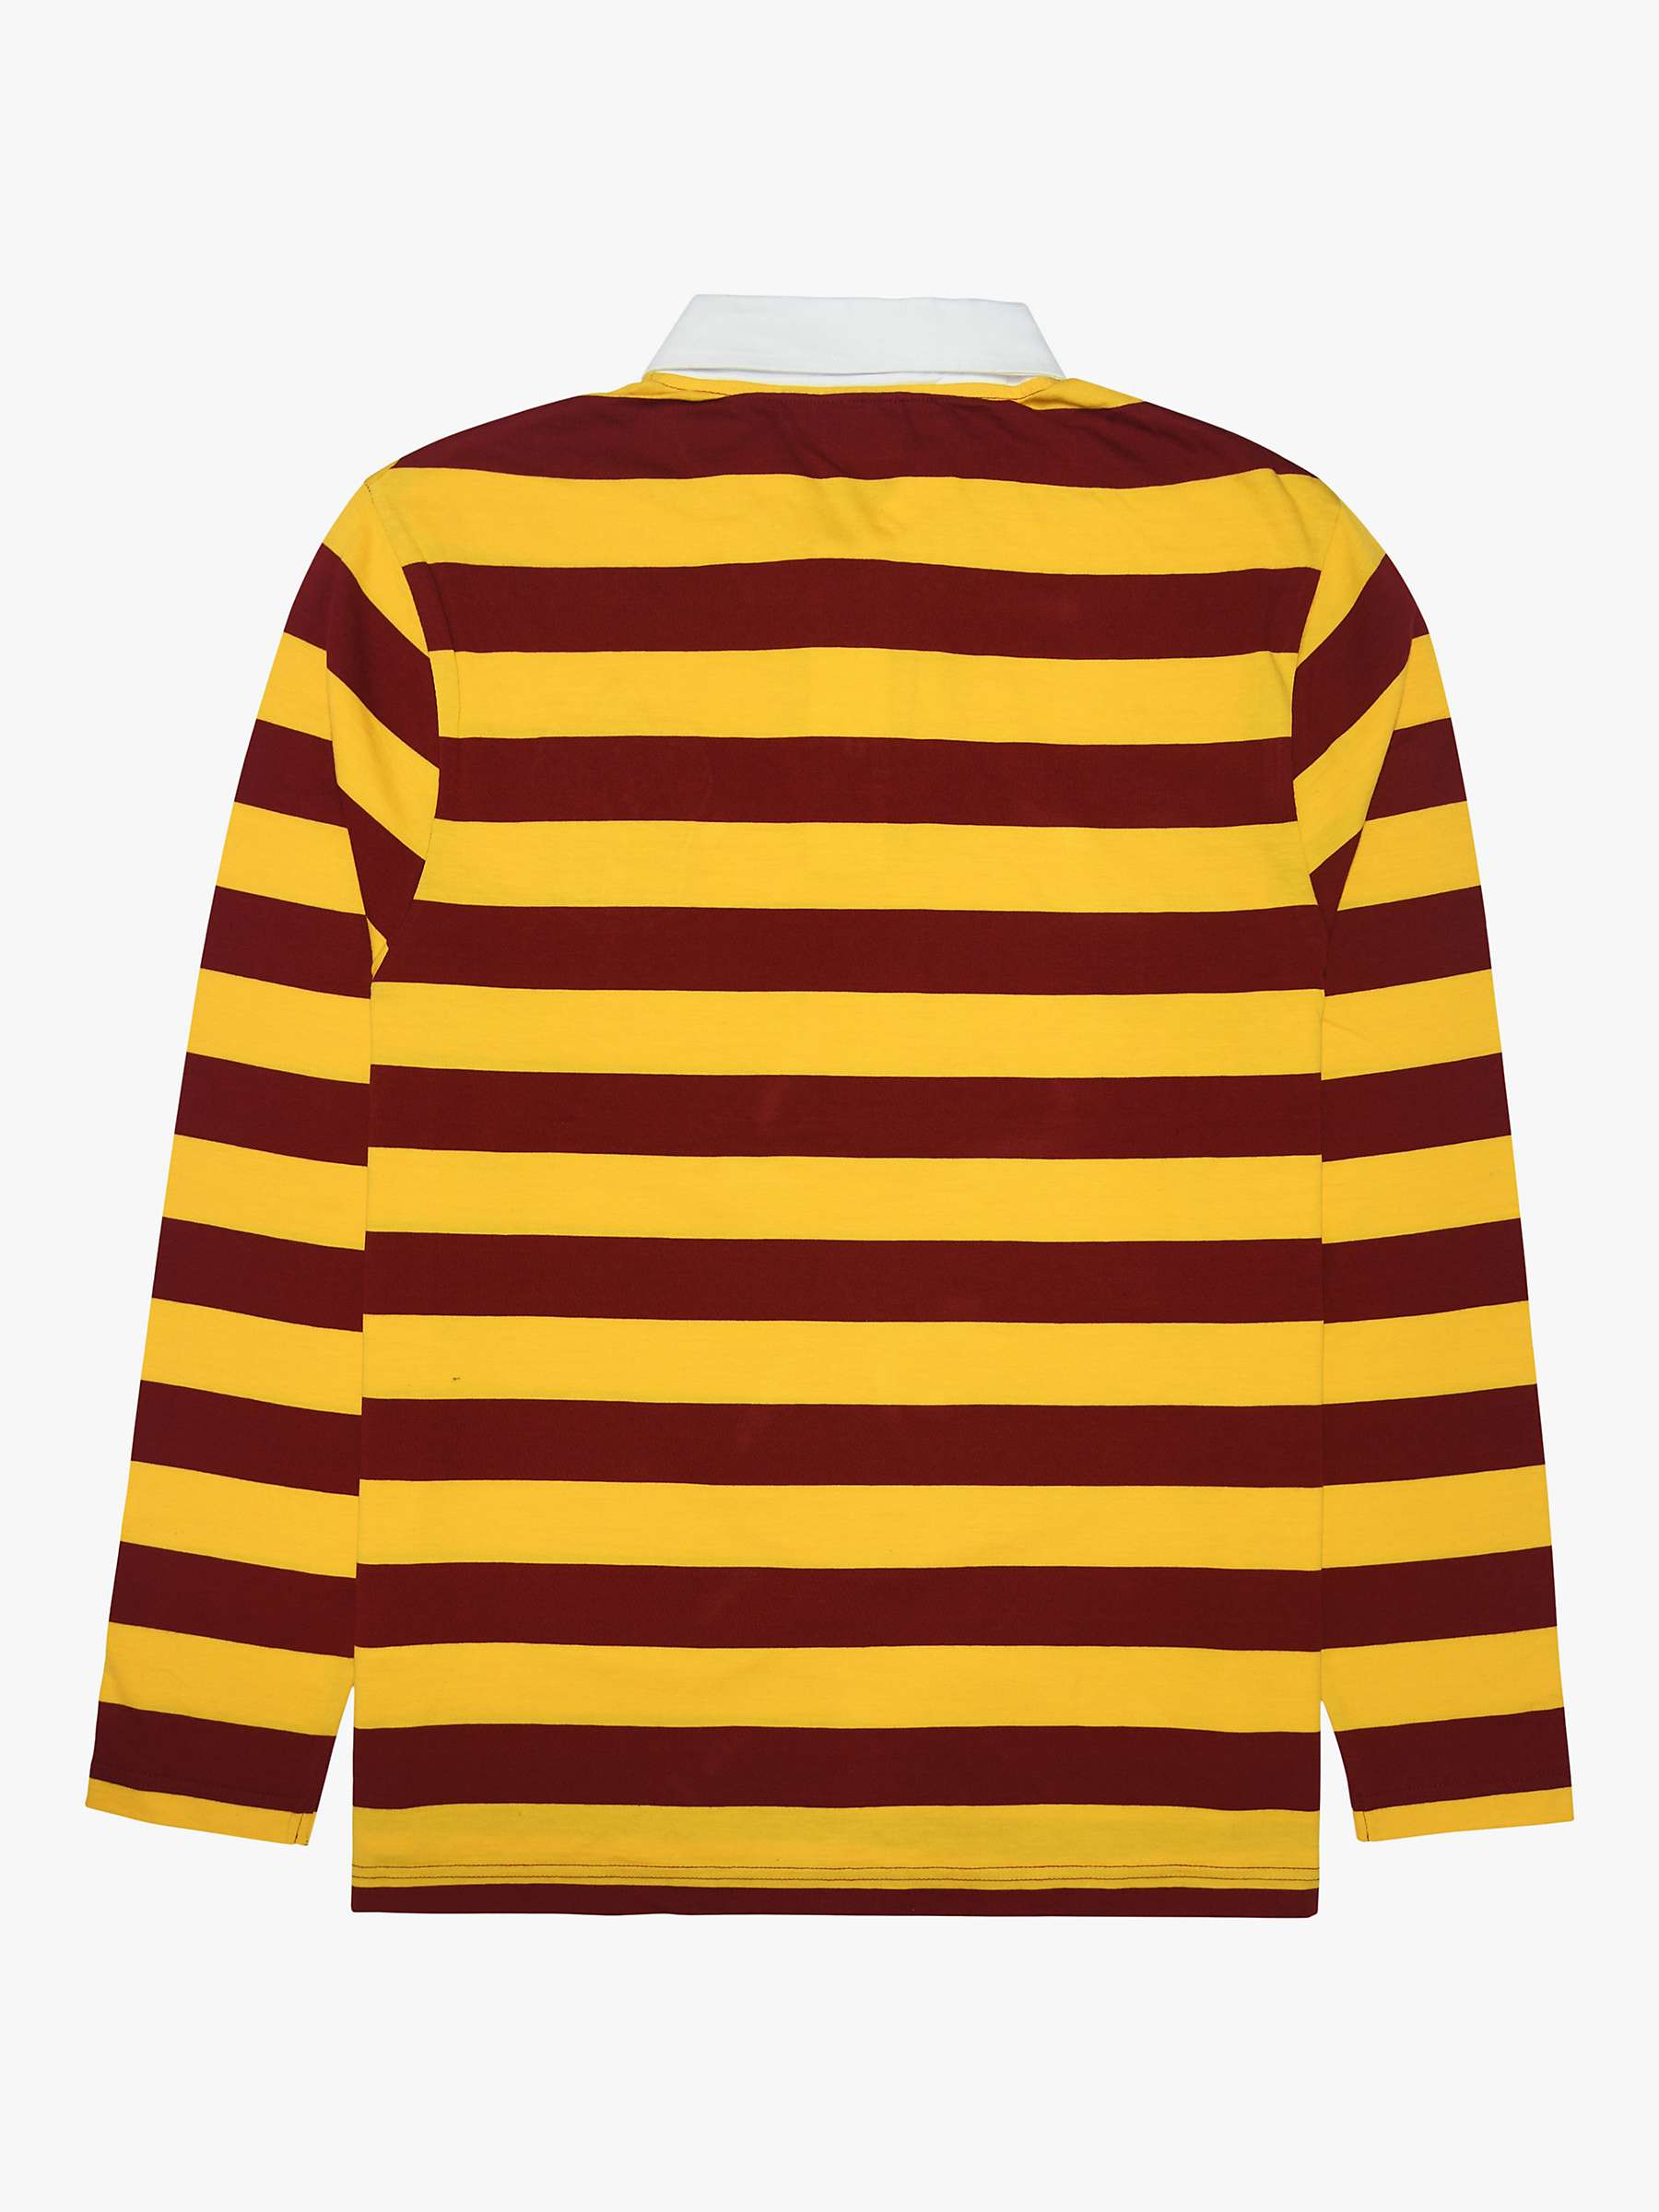 Buy Fabric Flavours Harry Potter Gryffindor Rugby Polo Top, Yellow/Red/Multi Online at johnlewis.com